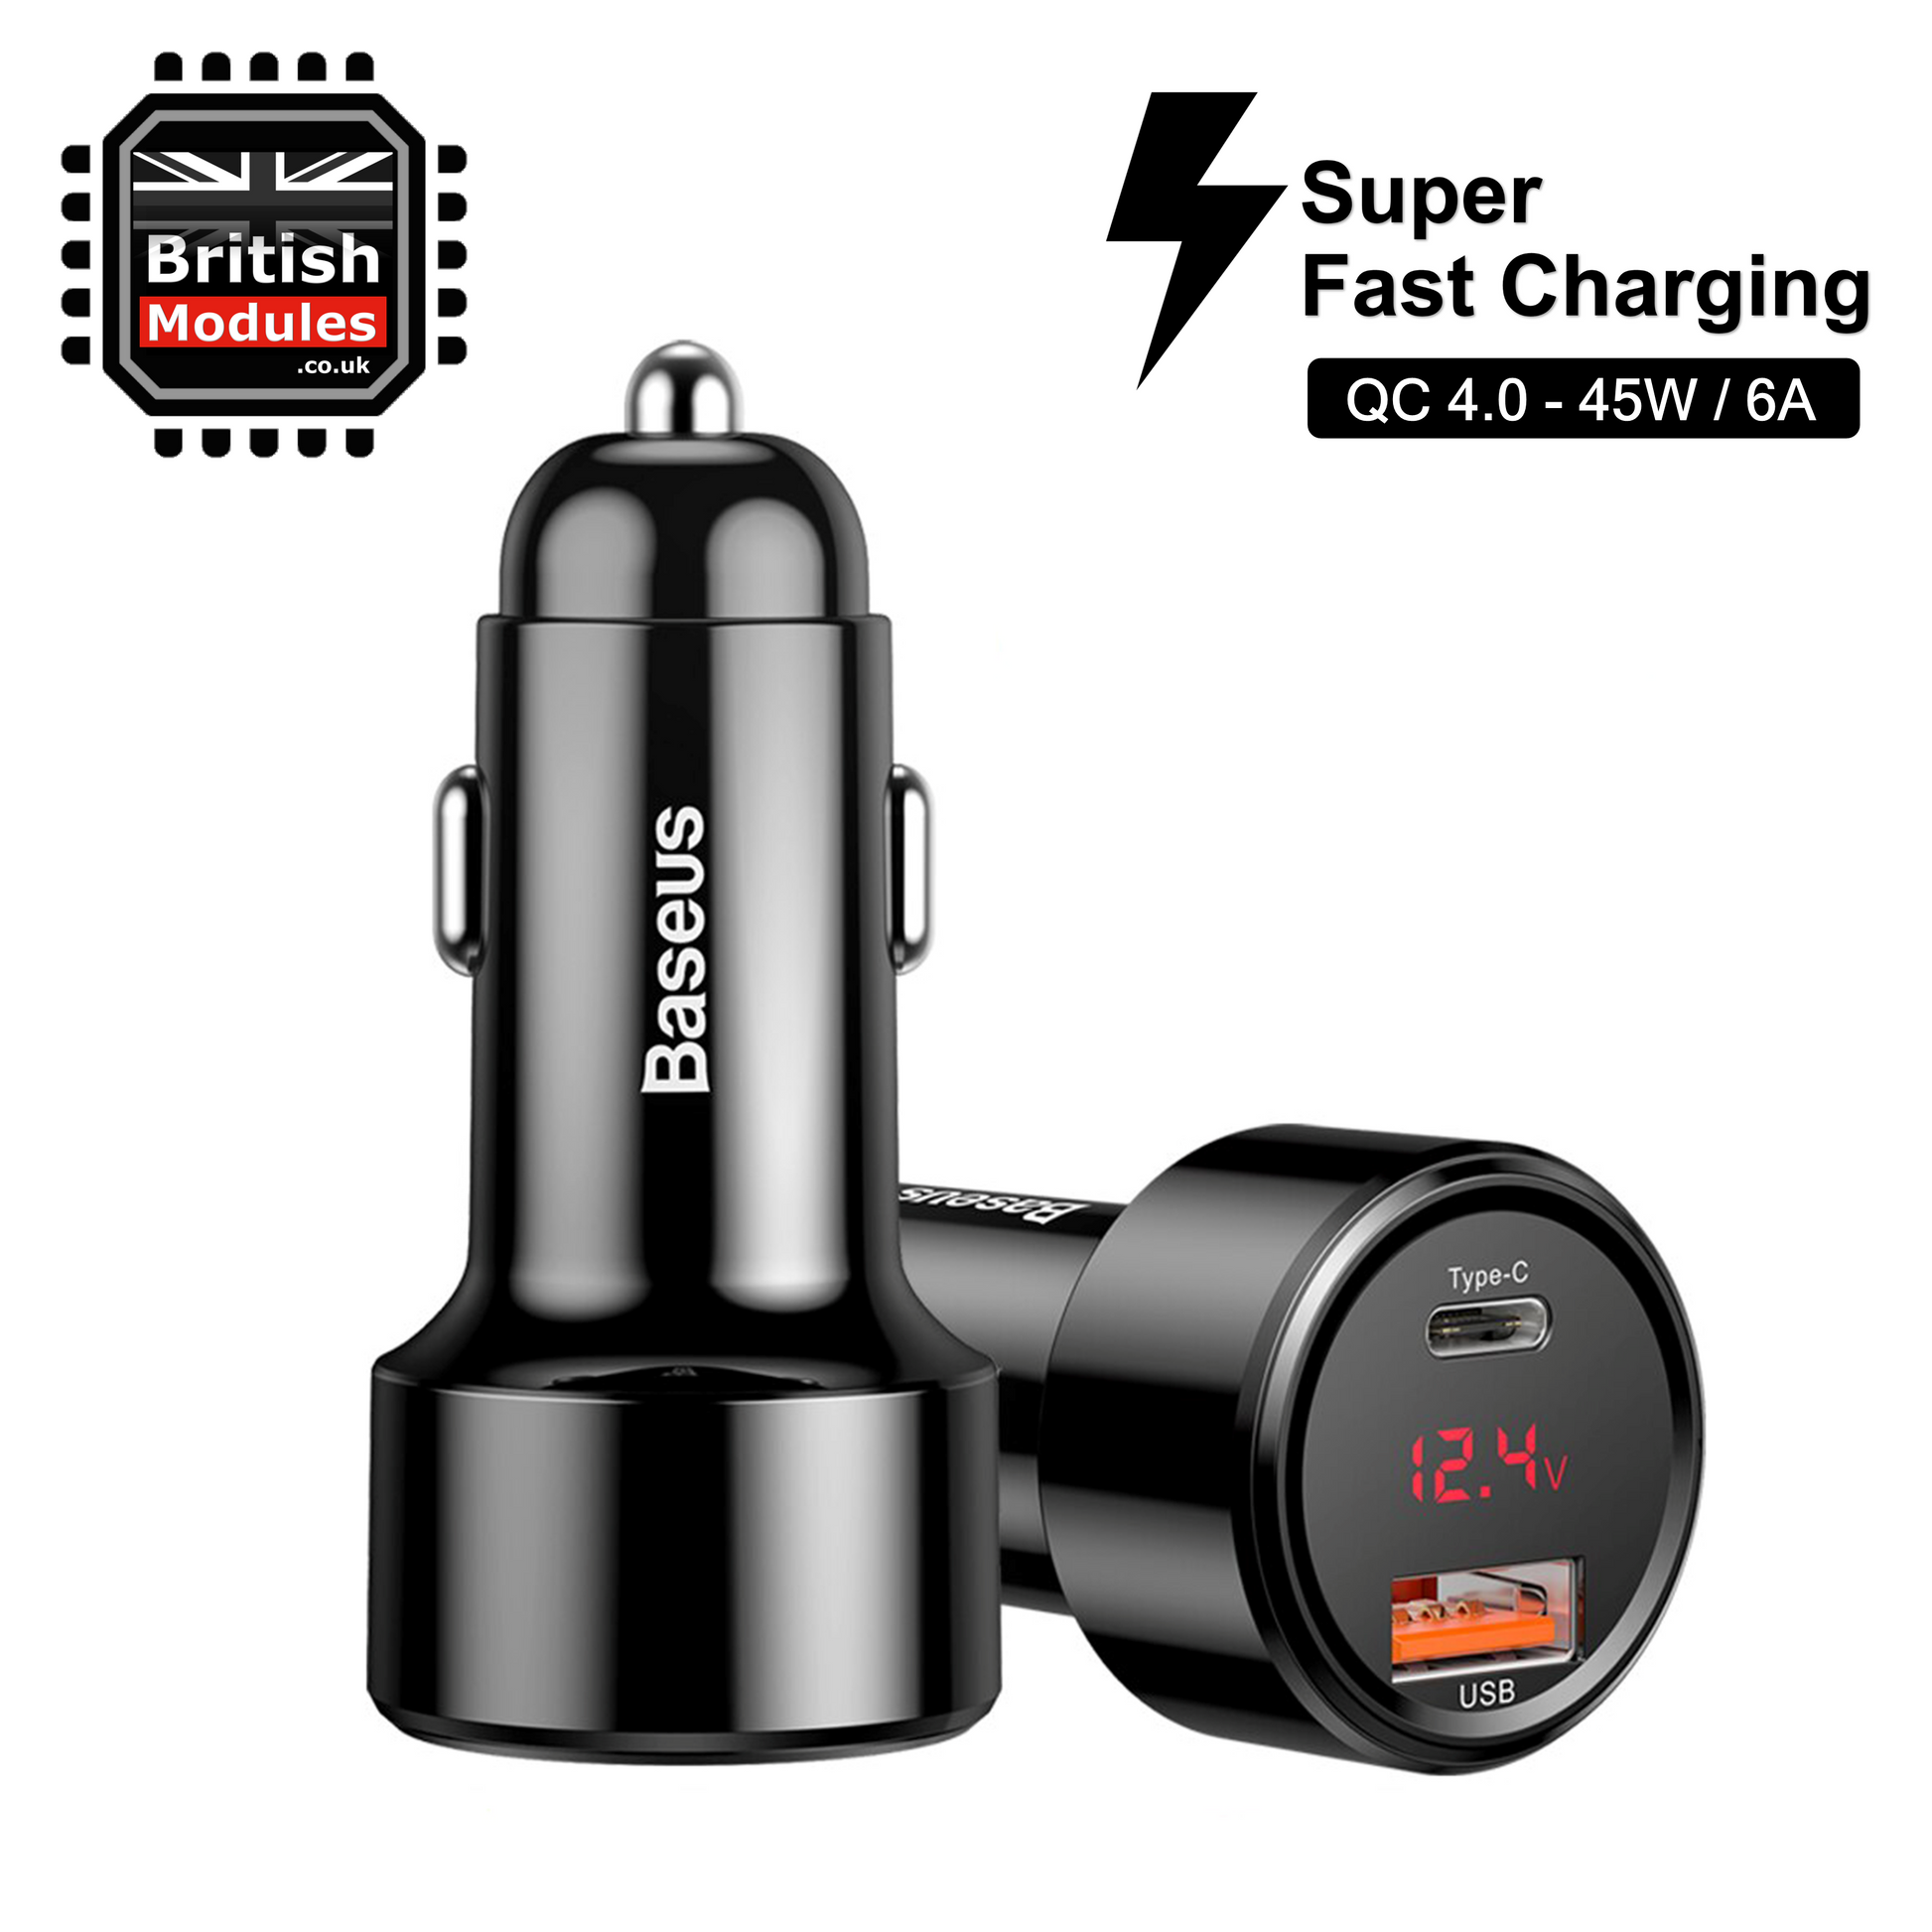 Baseus Super Fast Charging Car Charger 65W Dual Port with LED